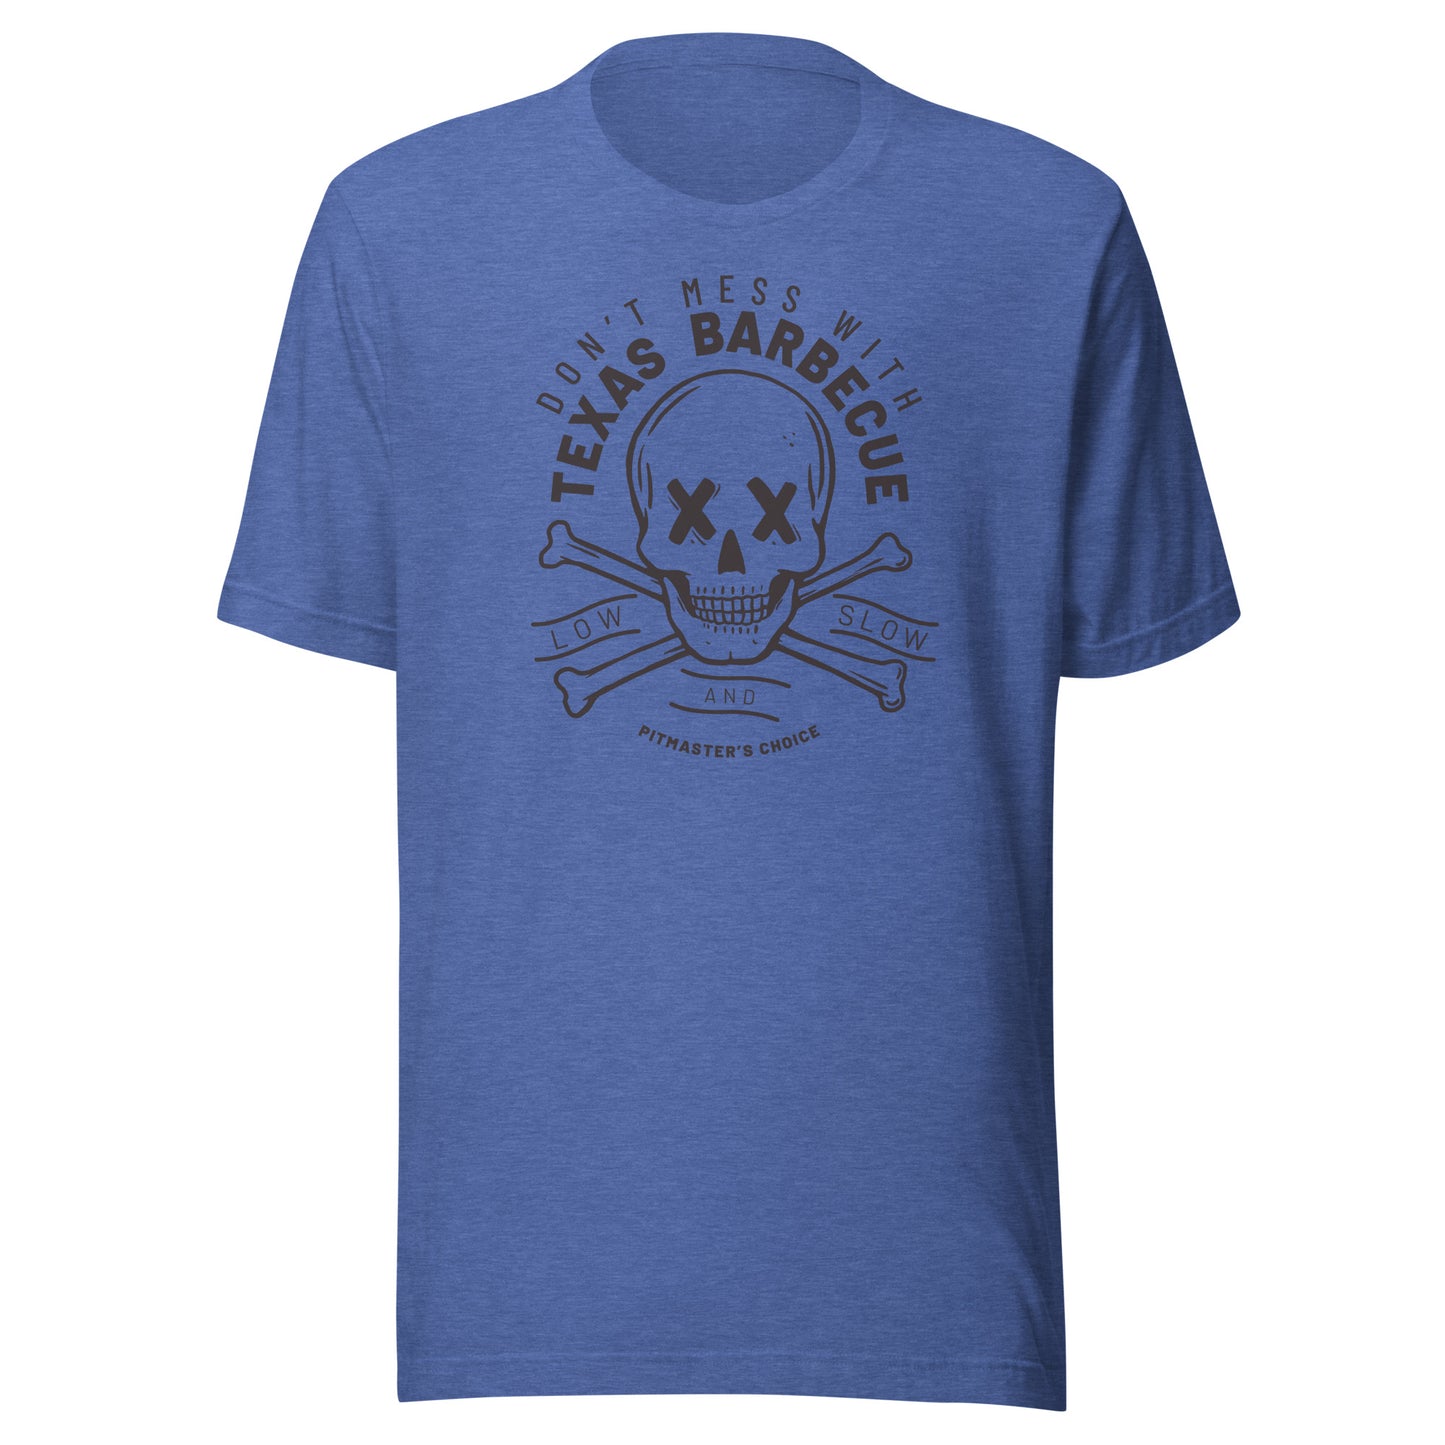 Don't Mess With Texas Barbecue T-shirt